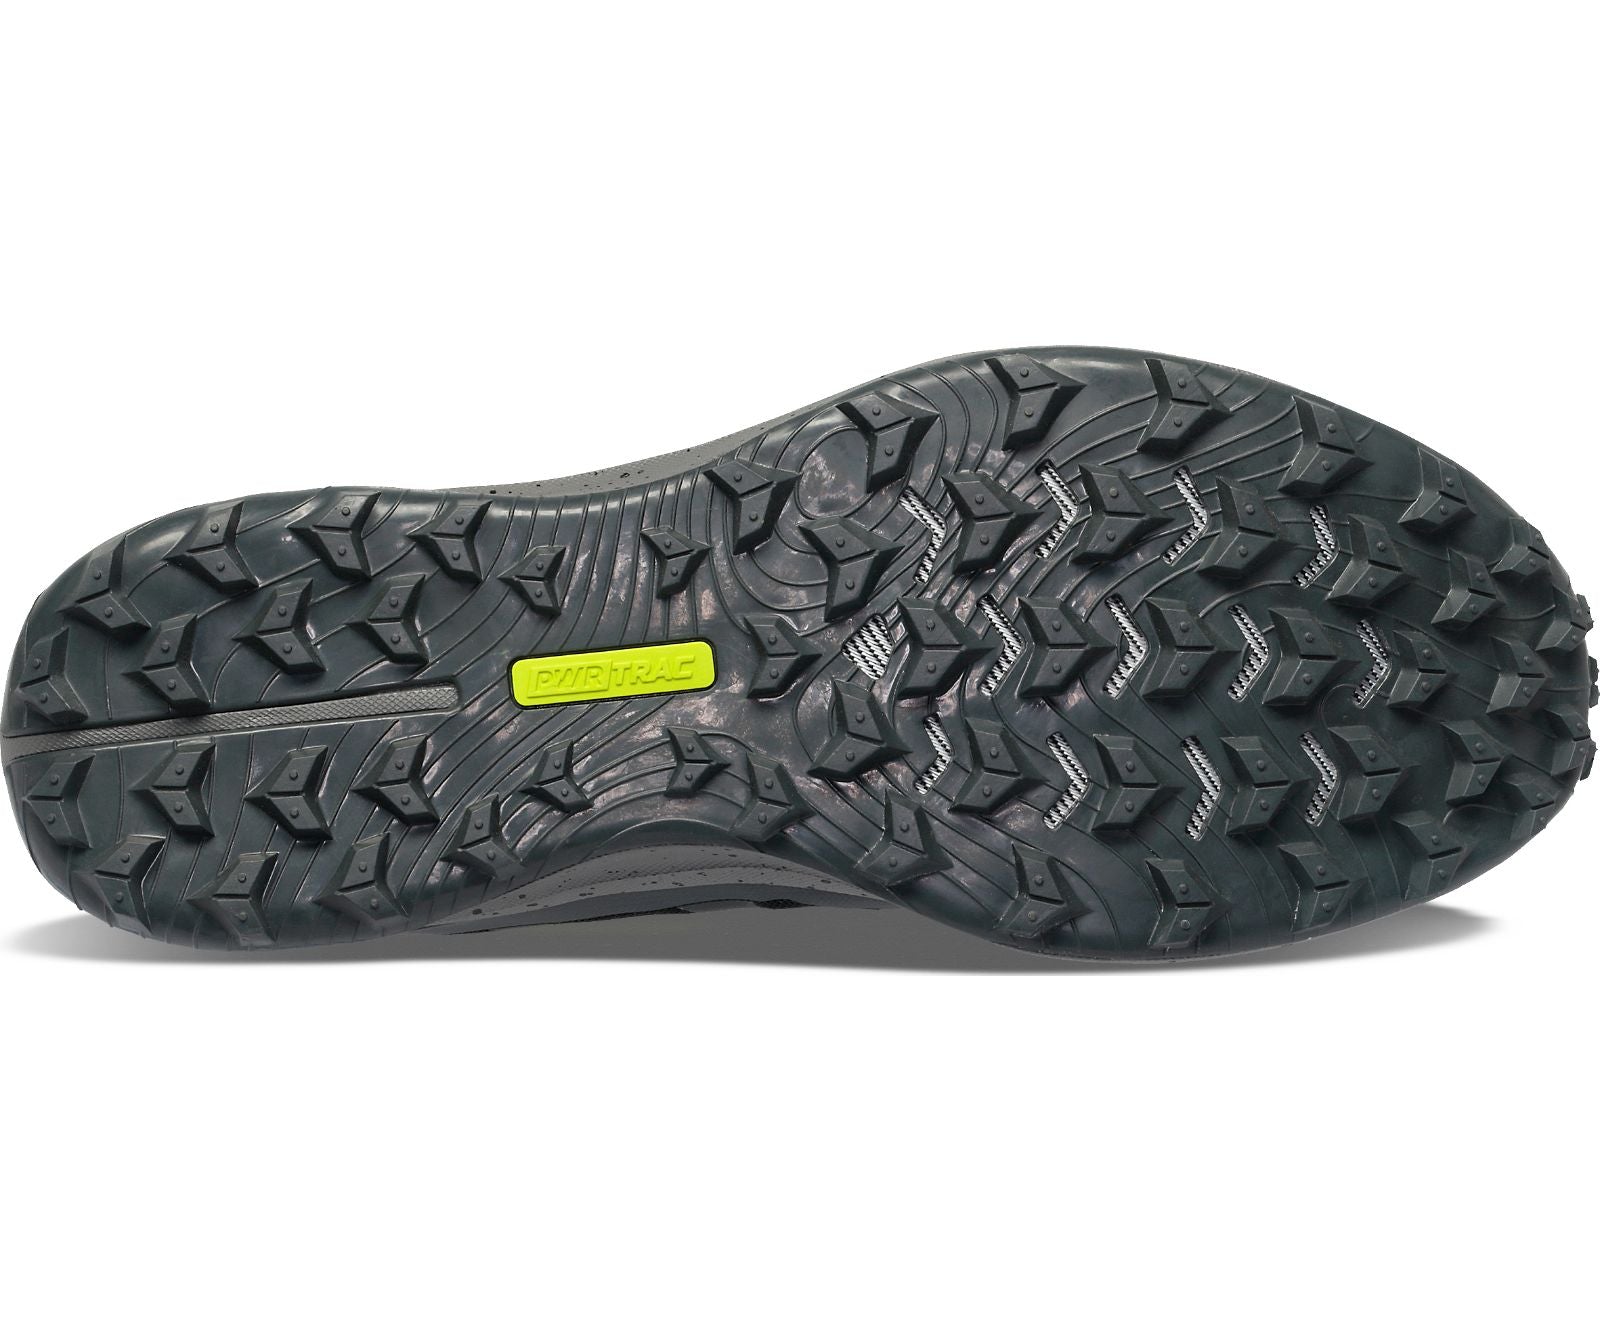 Bottom (outer sole) view of the Women's Peregrine 12 Trail shoe by Saucony in Black/Charcoal